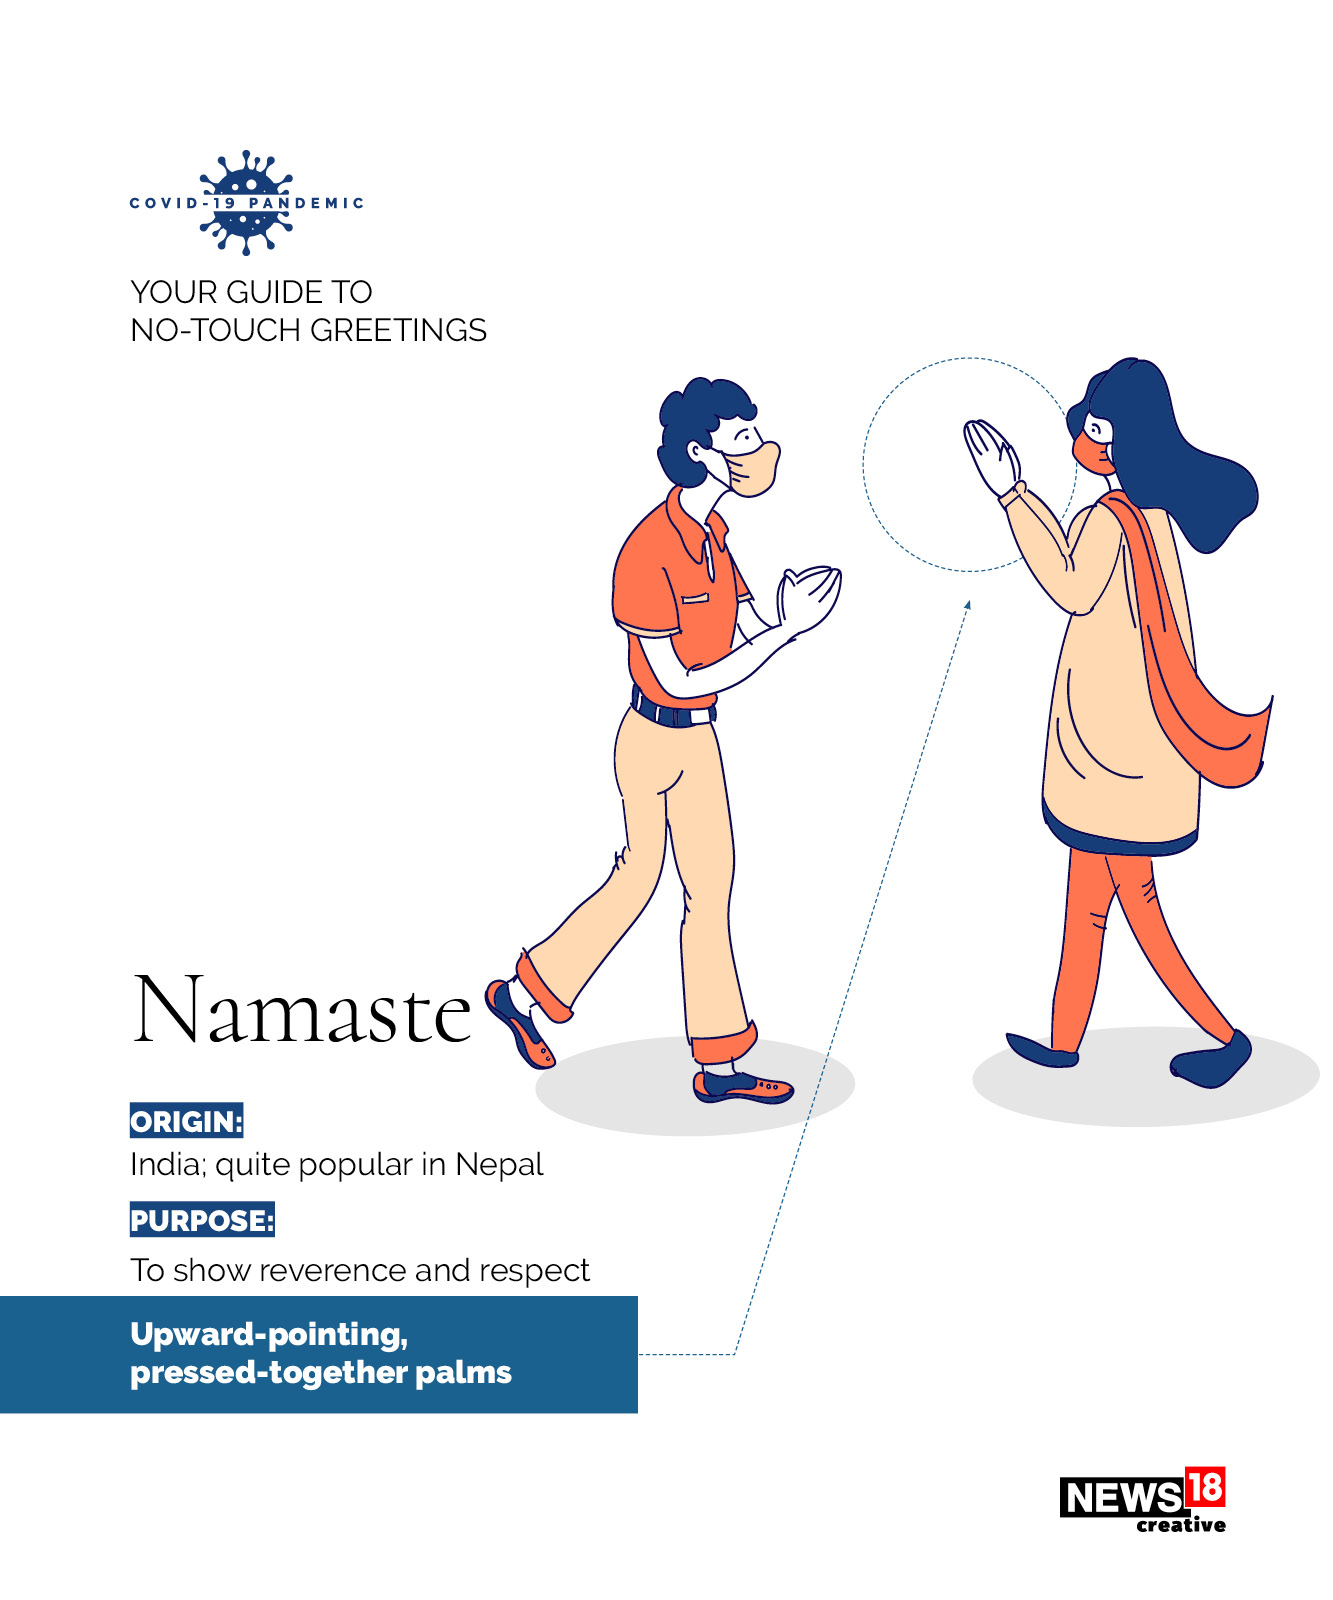 No handshake 2021: Your guide to no-touch greetings